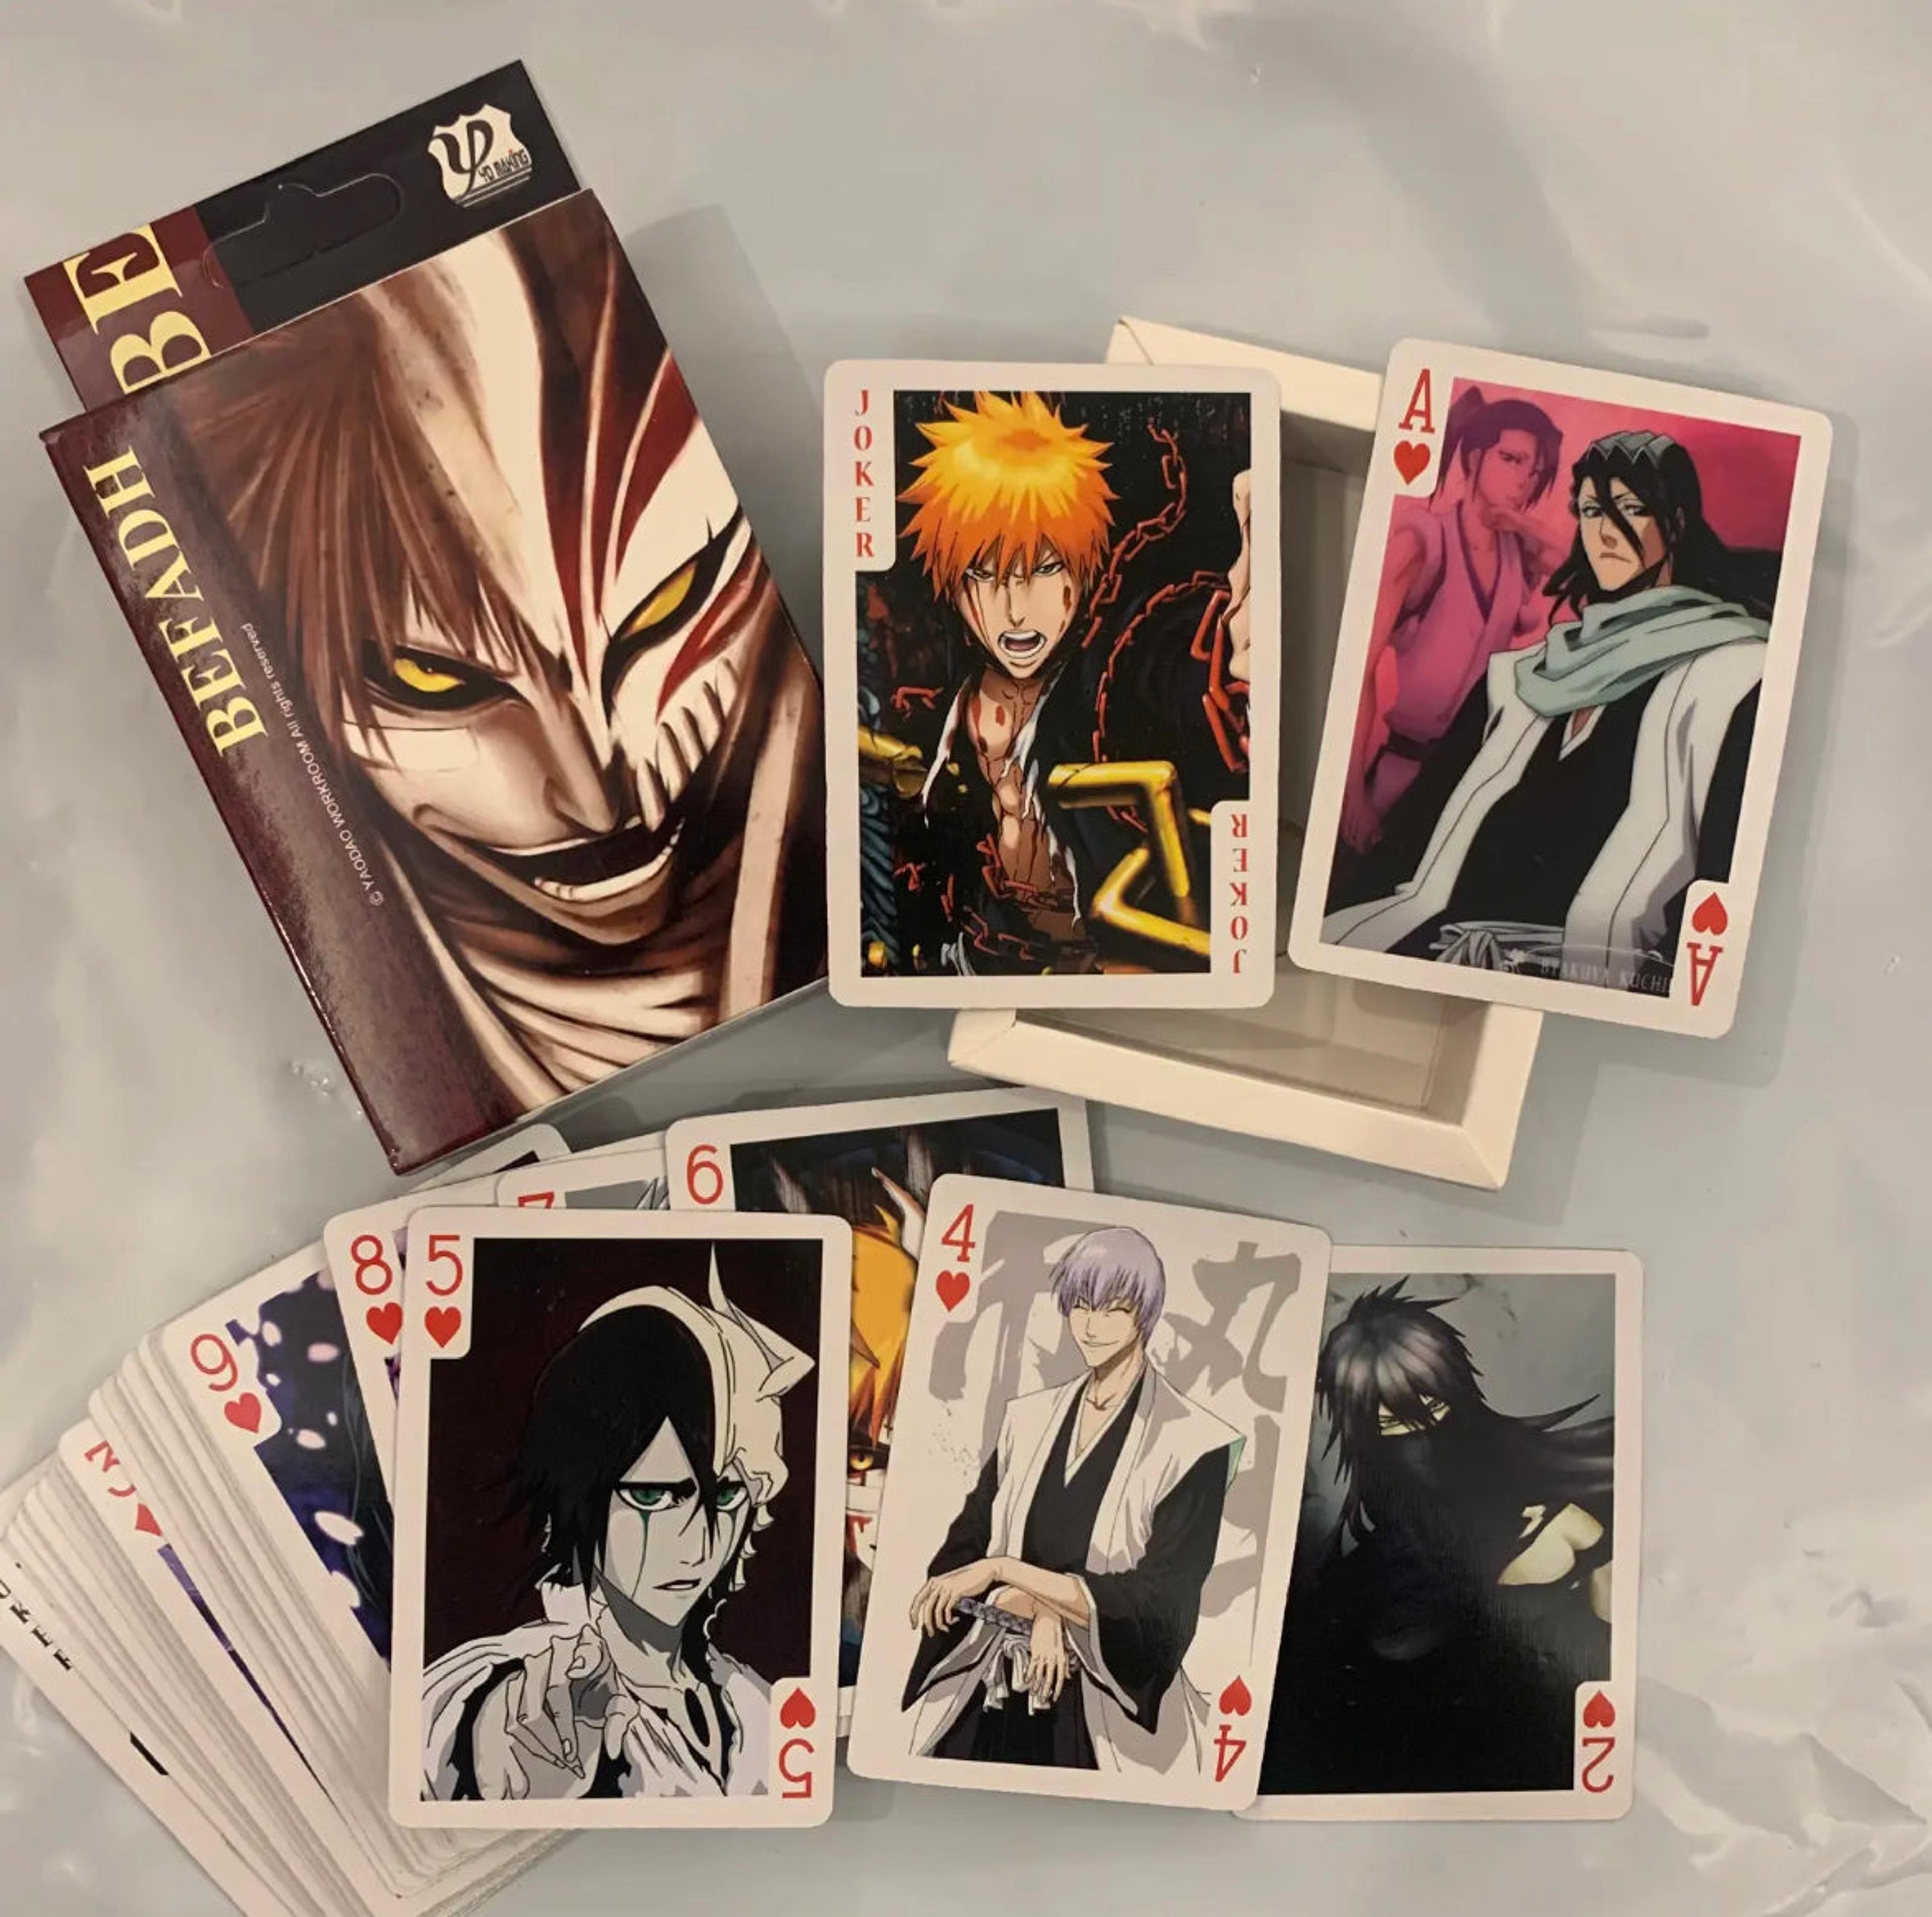 Bleach anime playing cards